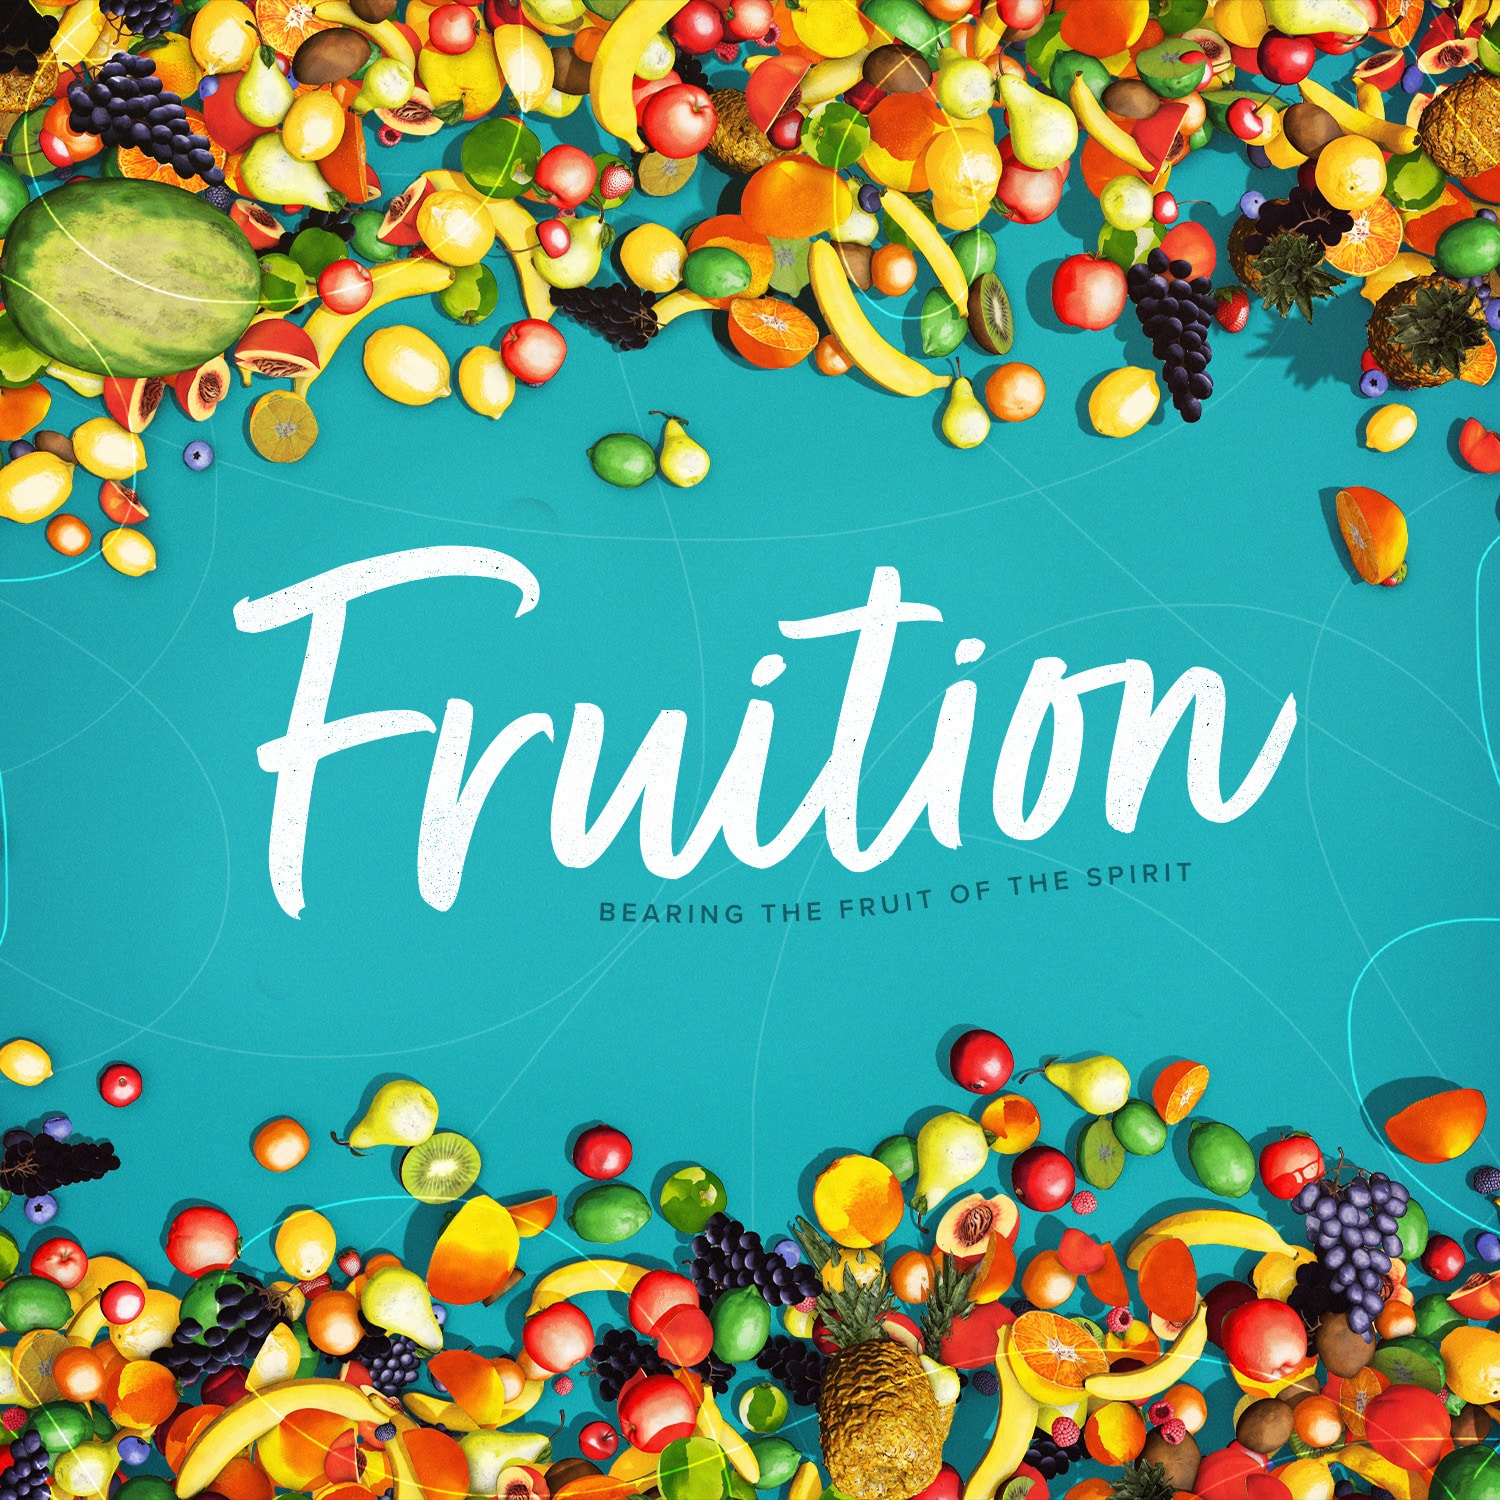 Fruition: Goodness